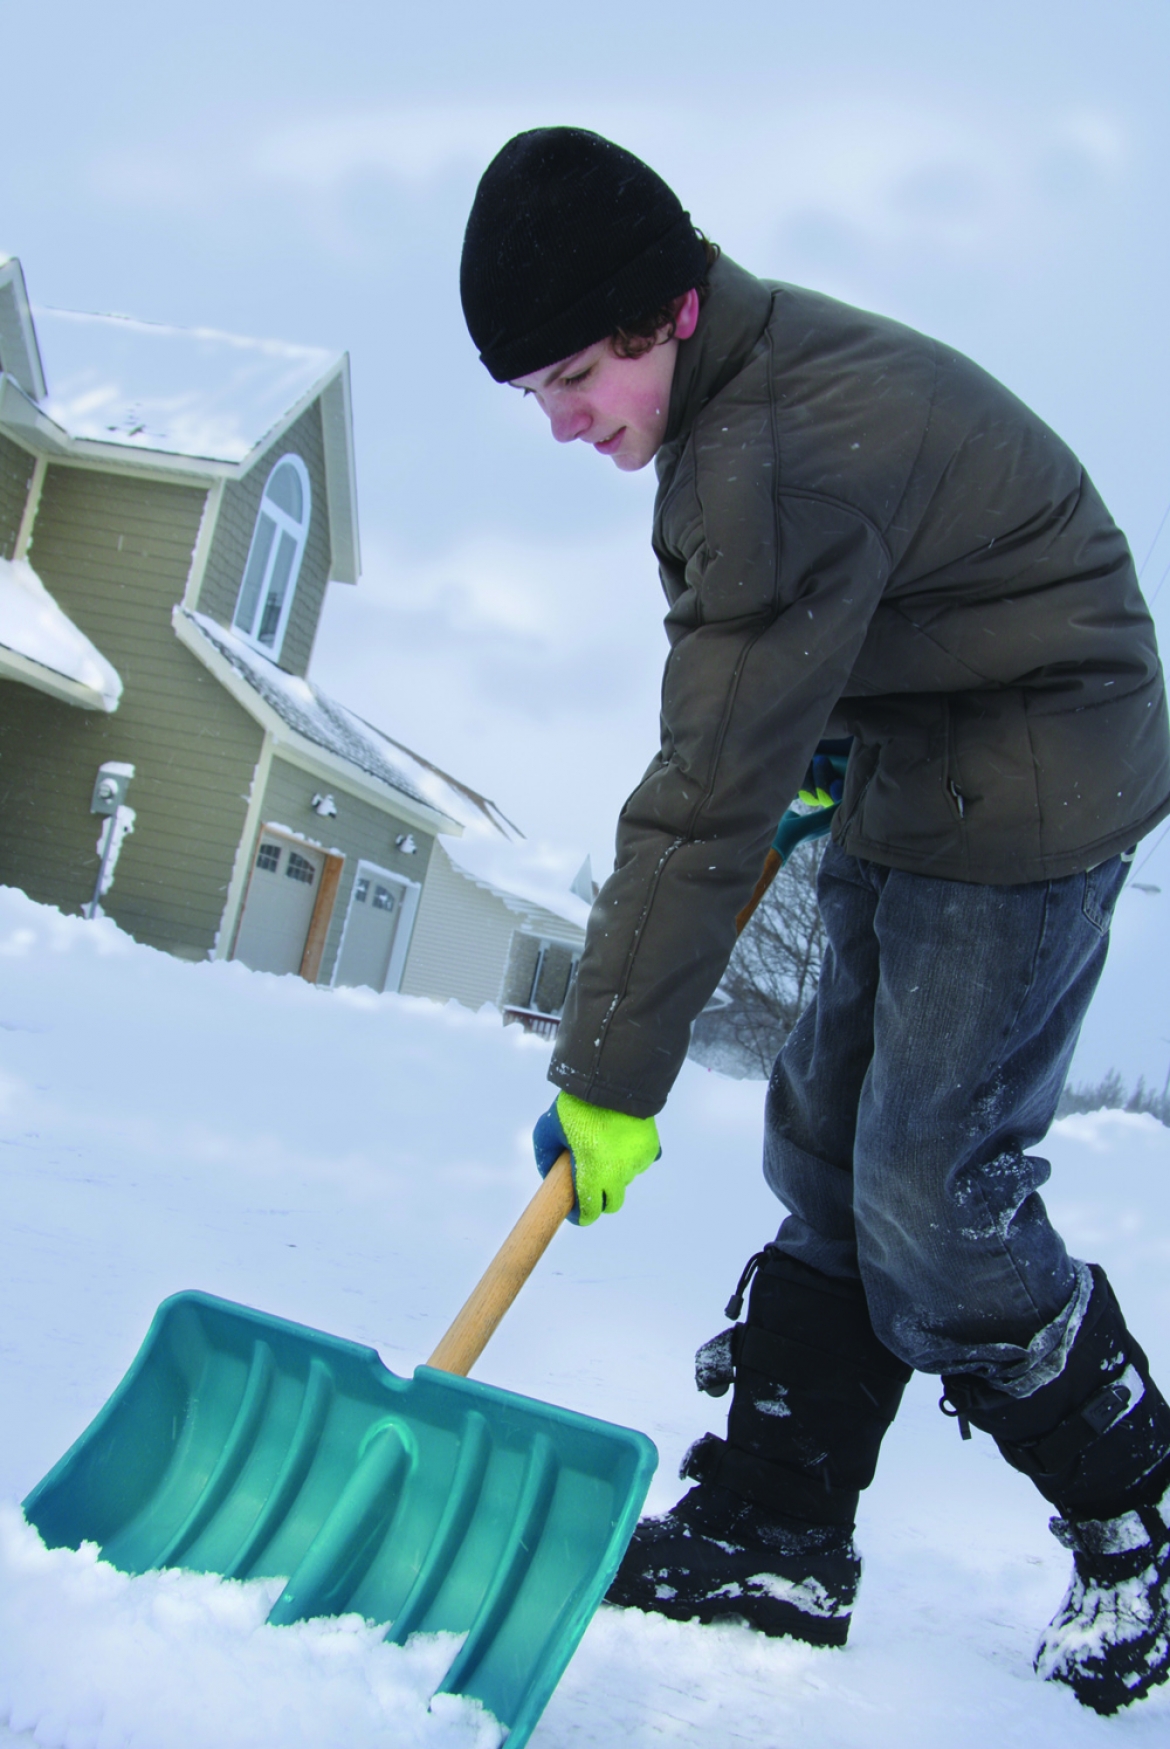 Green ways to clean up snow | Residential Commercial Heating Cooling General Contracting Plumbing Excavating Services Contractor | ACI Solutions